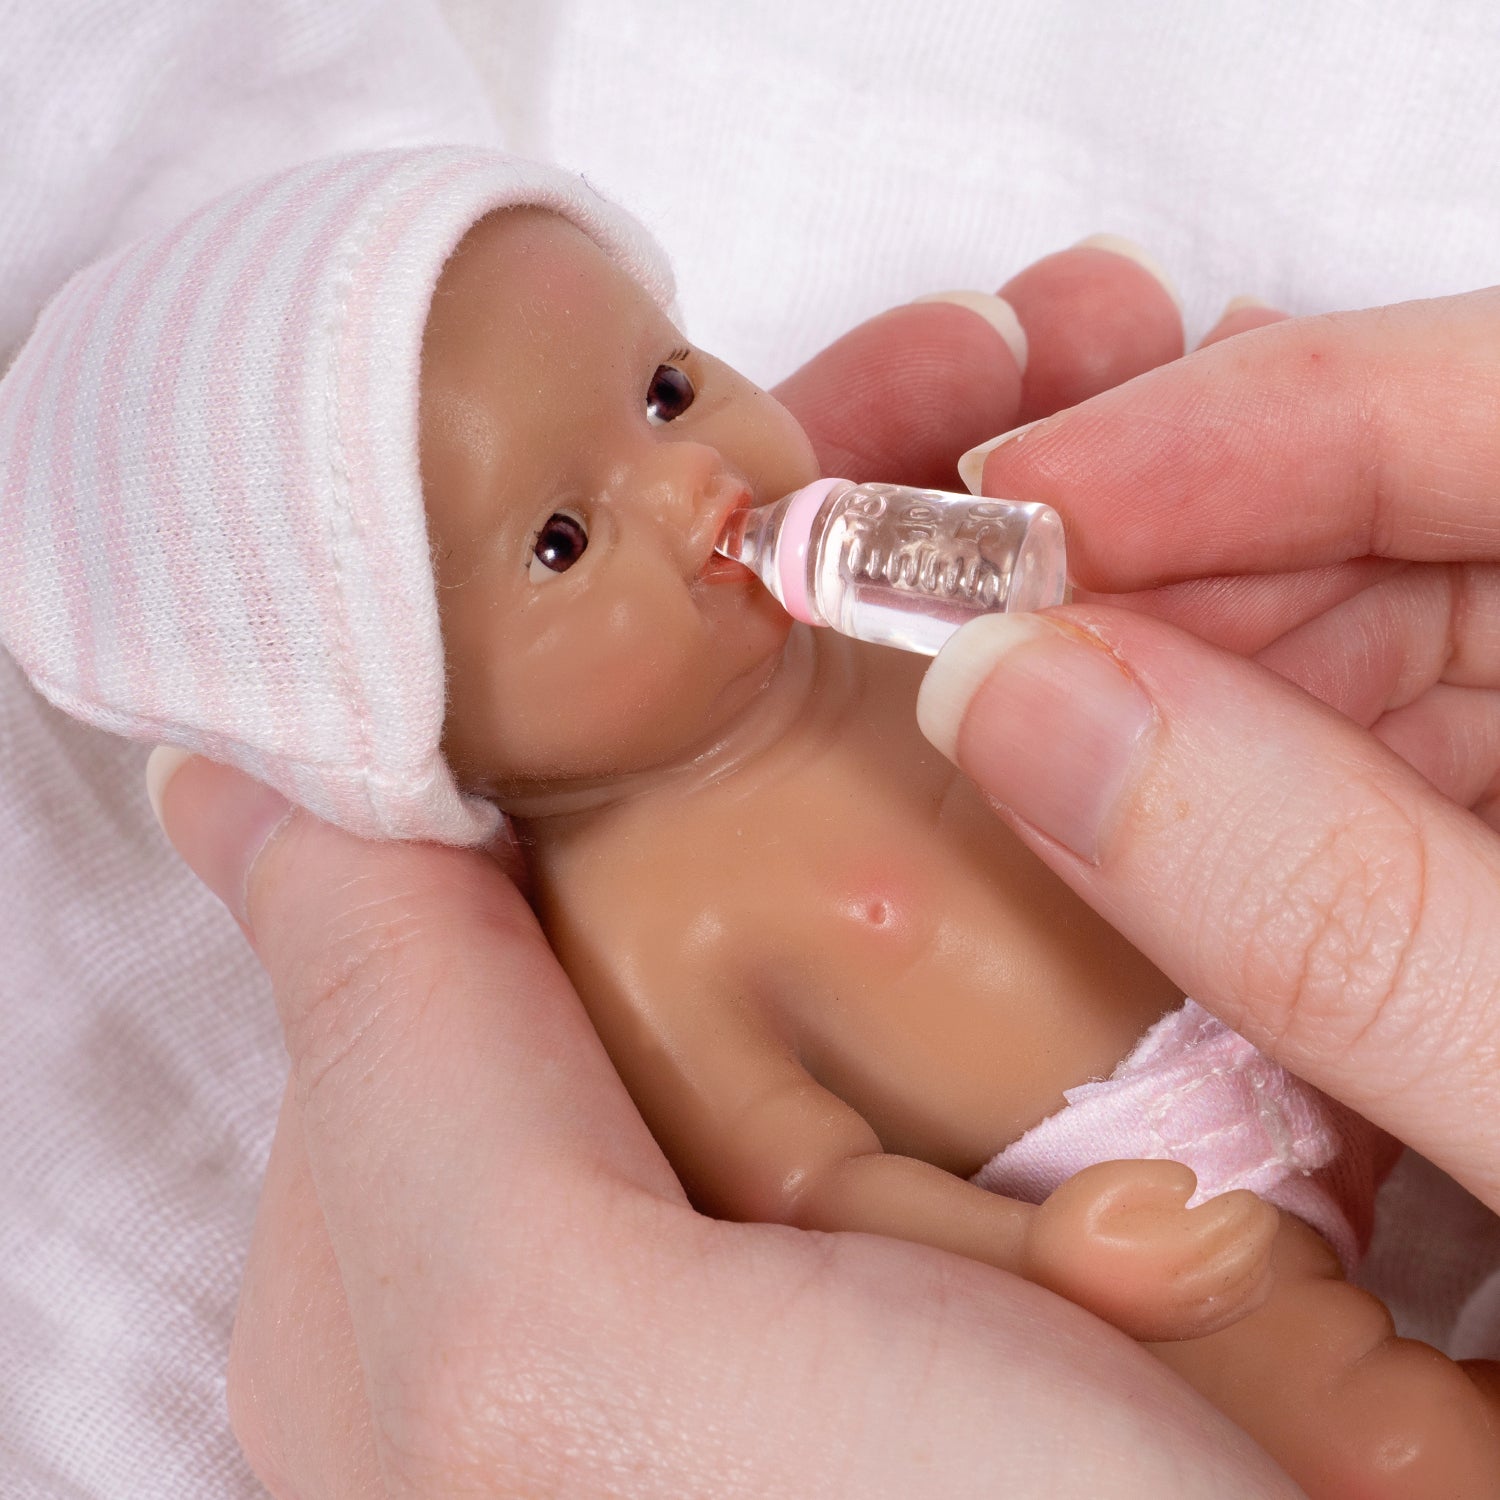 Paradise Galleries Itty Bitty Silicone Babies - Baby Girl, 5 inches, anatomically correct